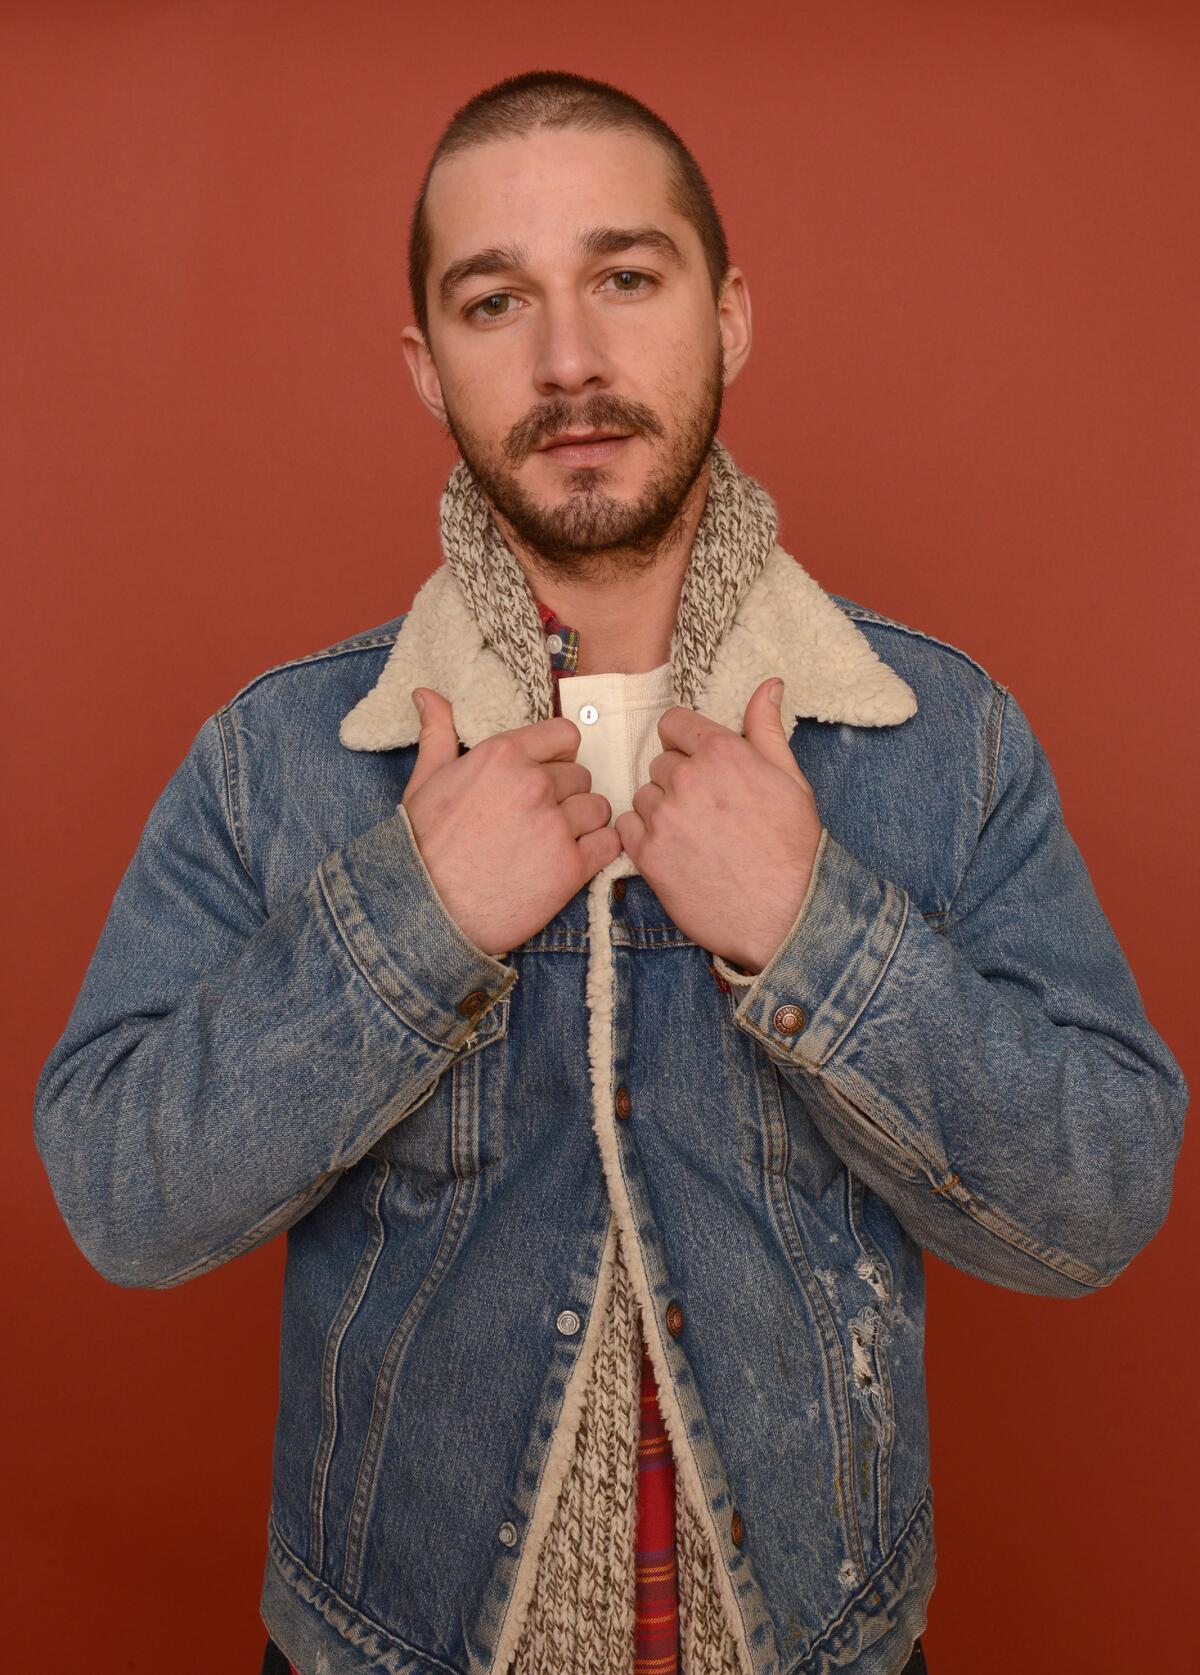 Shia LaBeouf, here at the 2013 Sundance Film Festival, has an awkward situation on his hands.